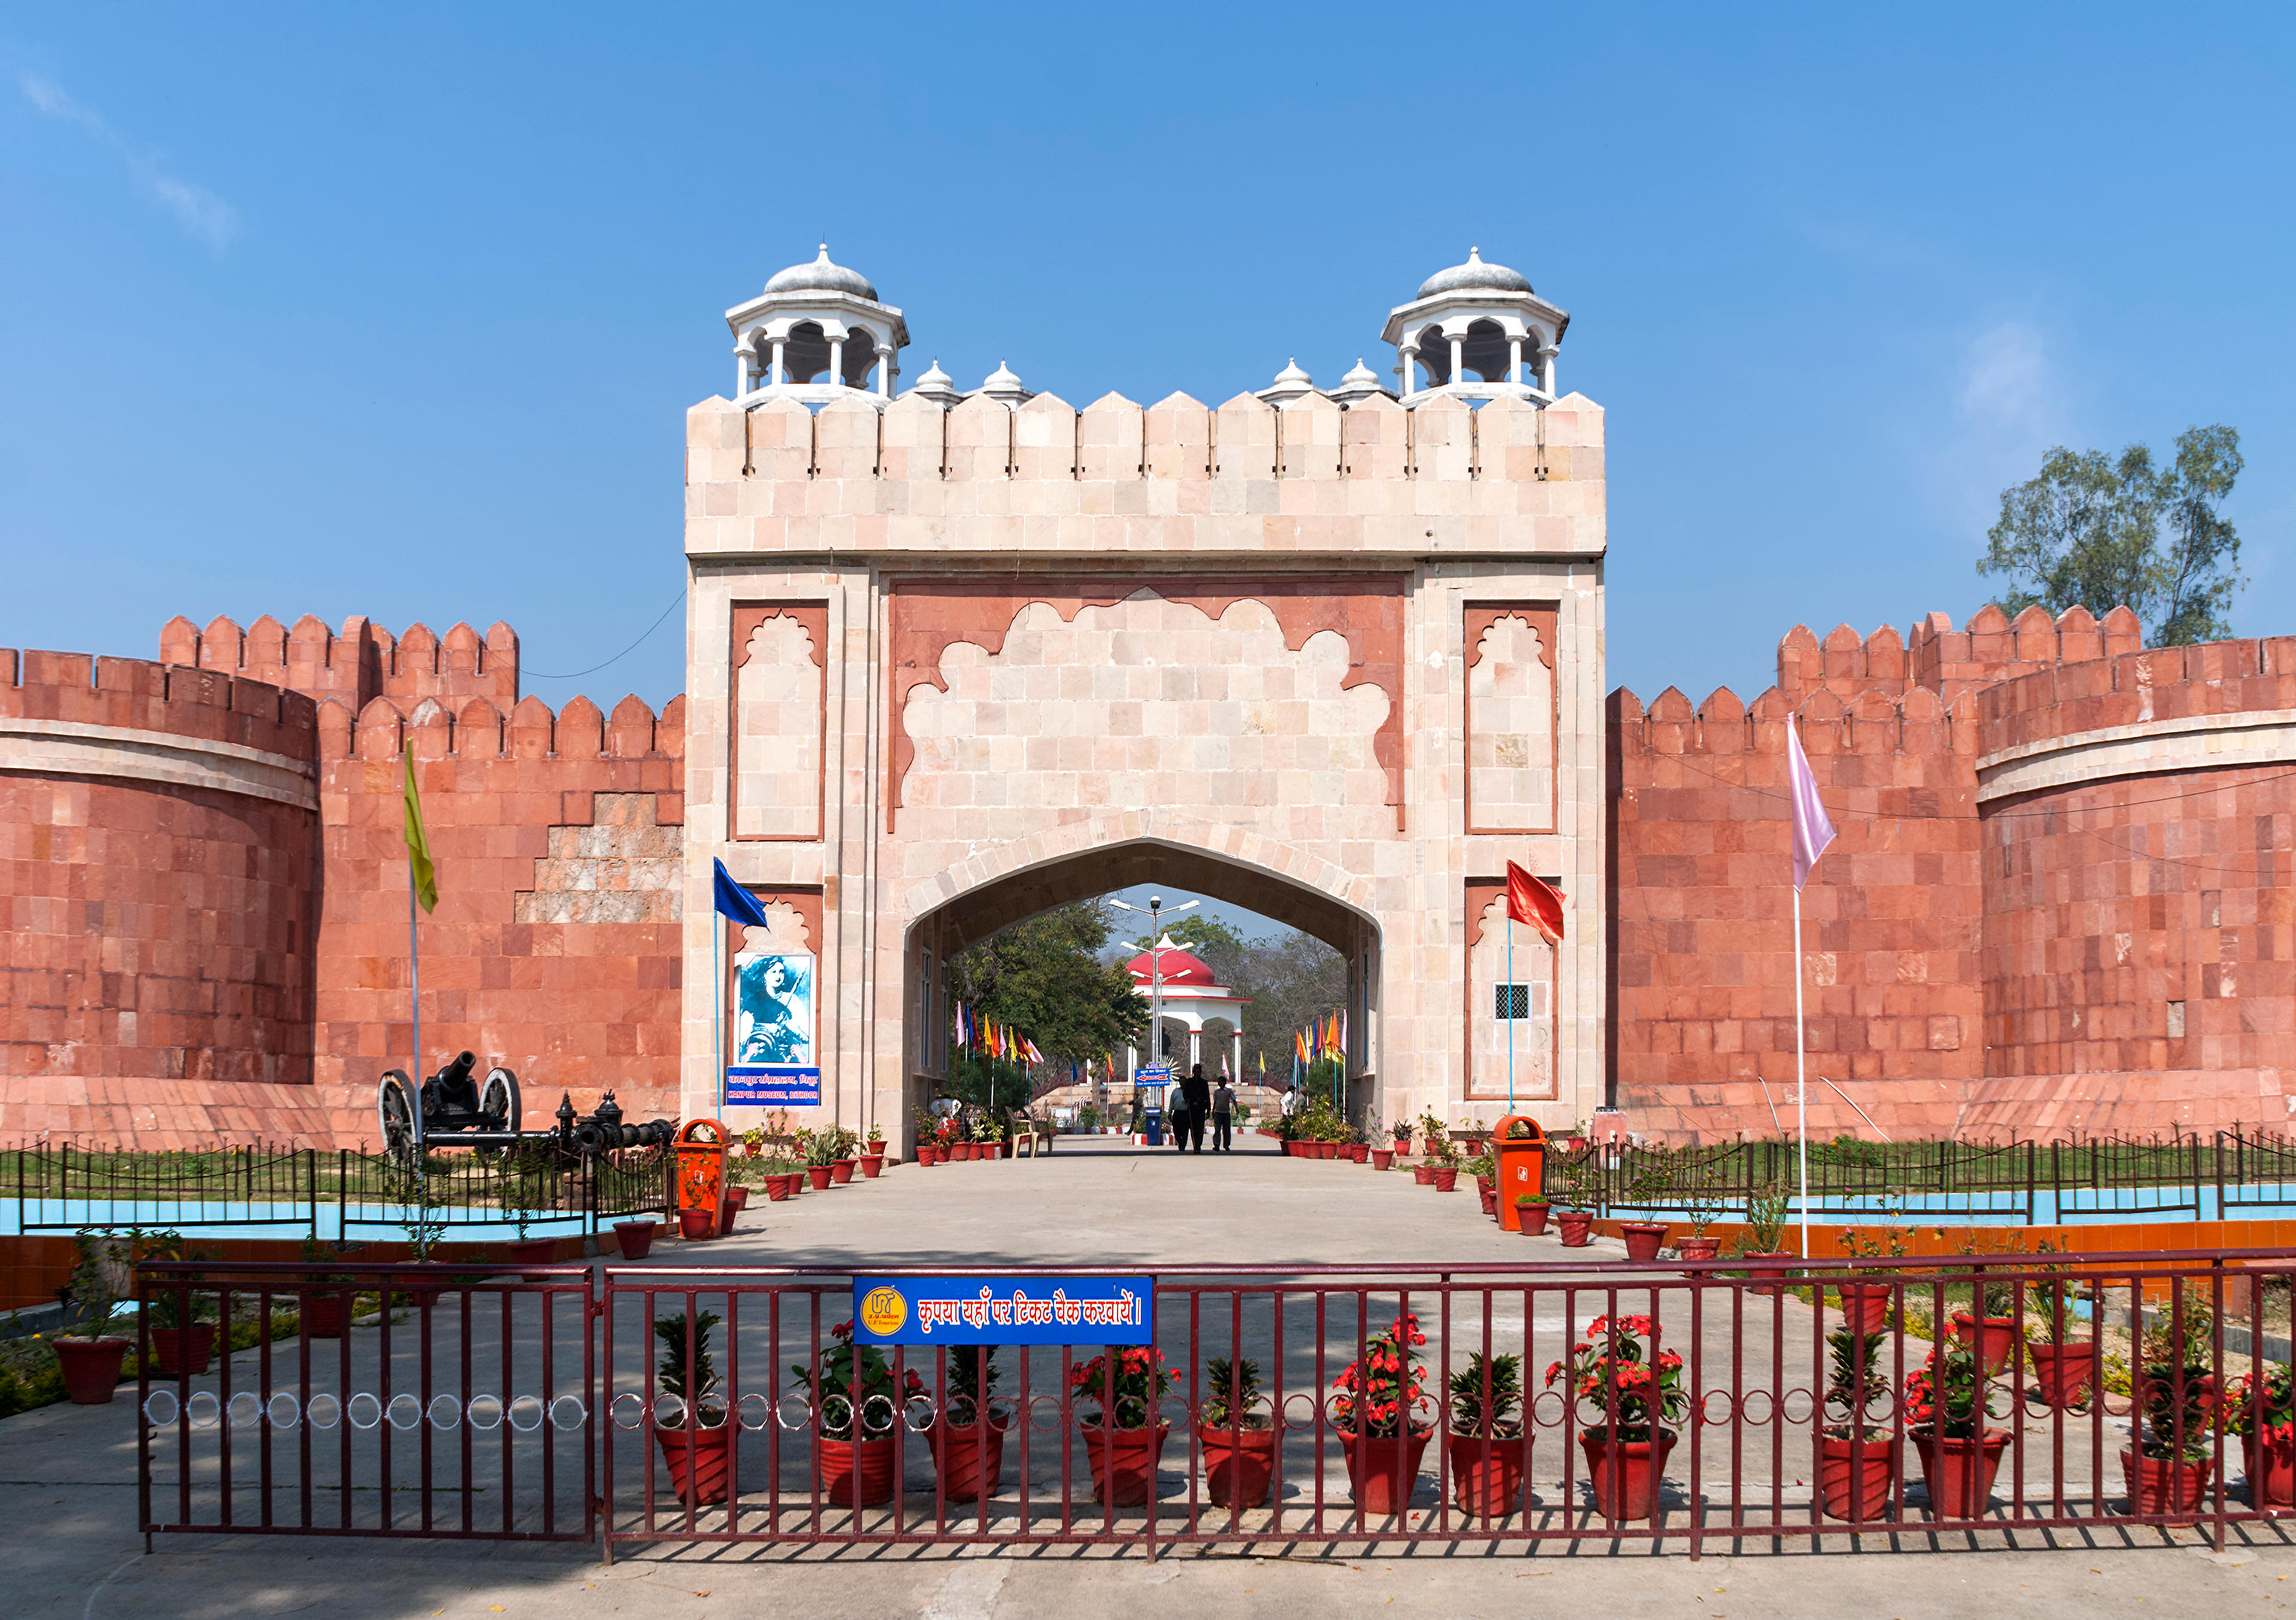 travel and tourism course fees in kanpur